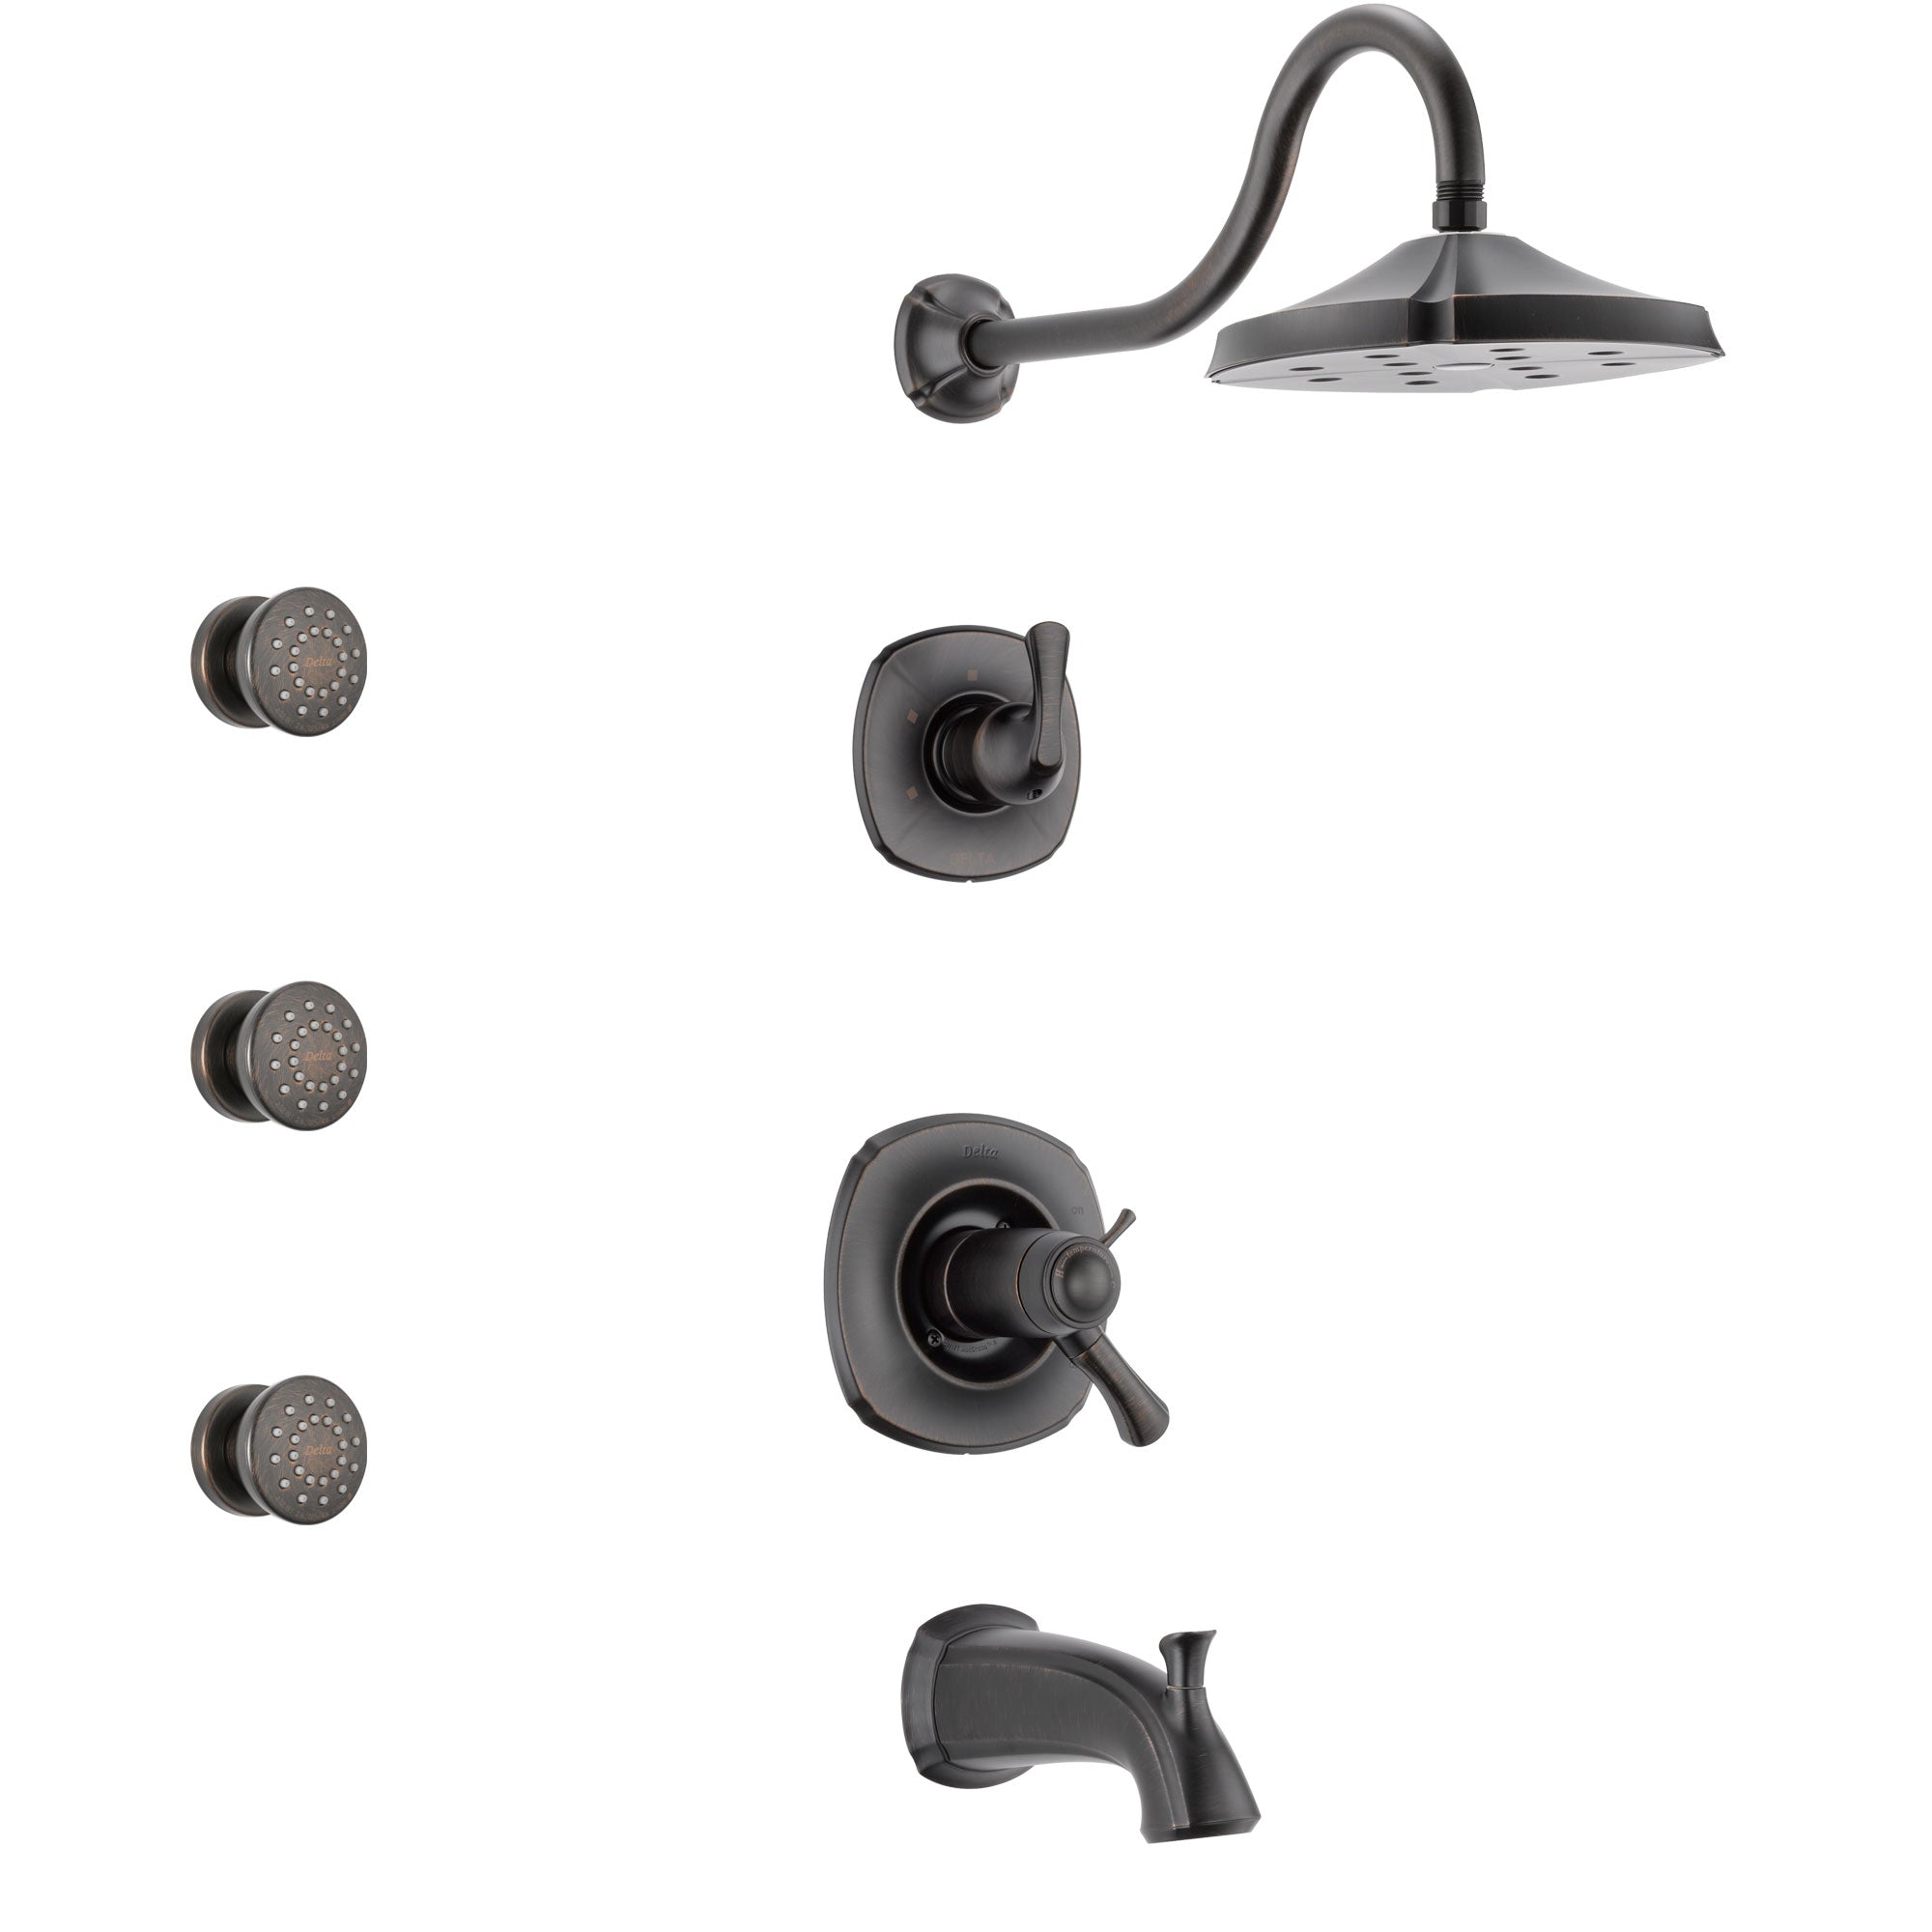 Delta Addison Venetian Bronze Tub and Shower System with Dual Thermostatic Control Handle, Diverter, Showerhead, and 3 Body Sprays SS17T4921RB1